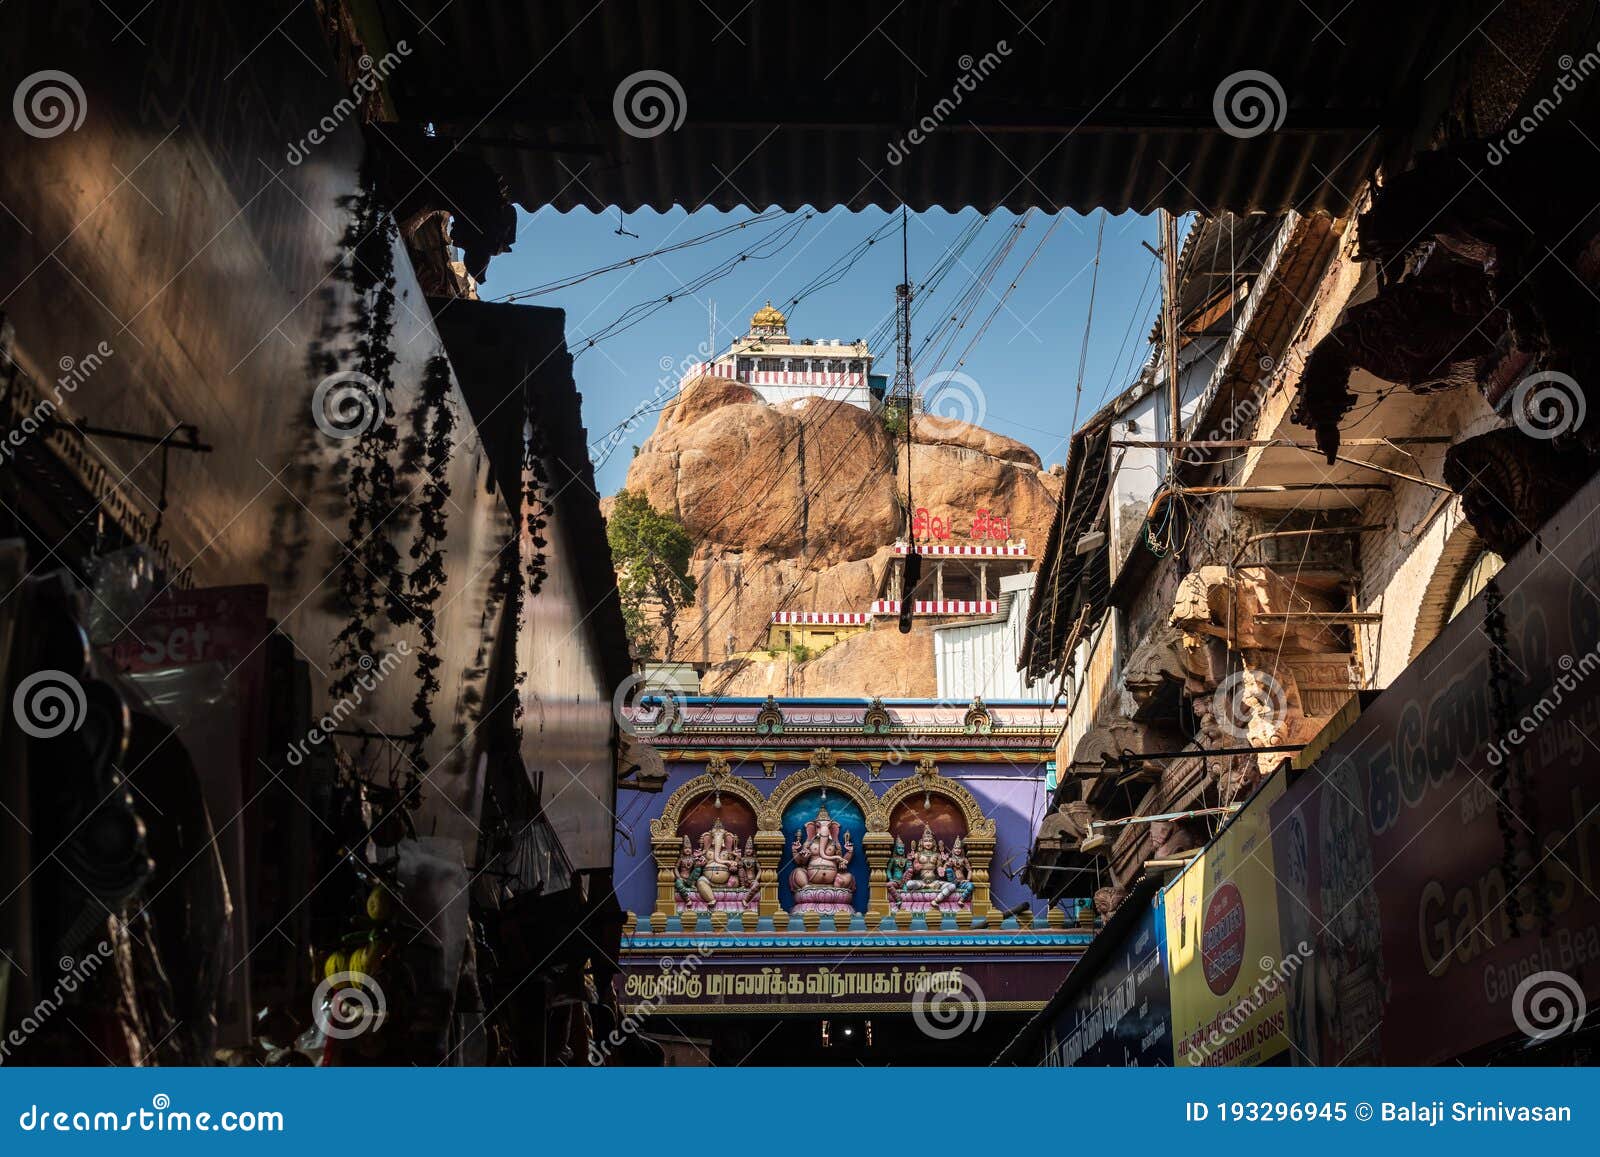 Rock Fort temple in Trichy  editorial image Image of 